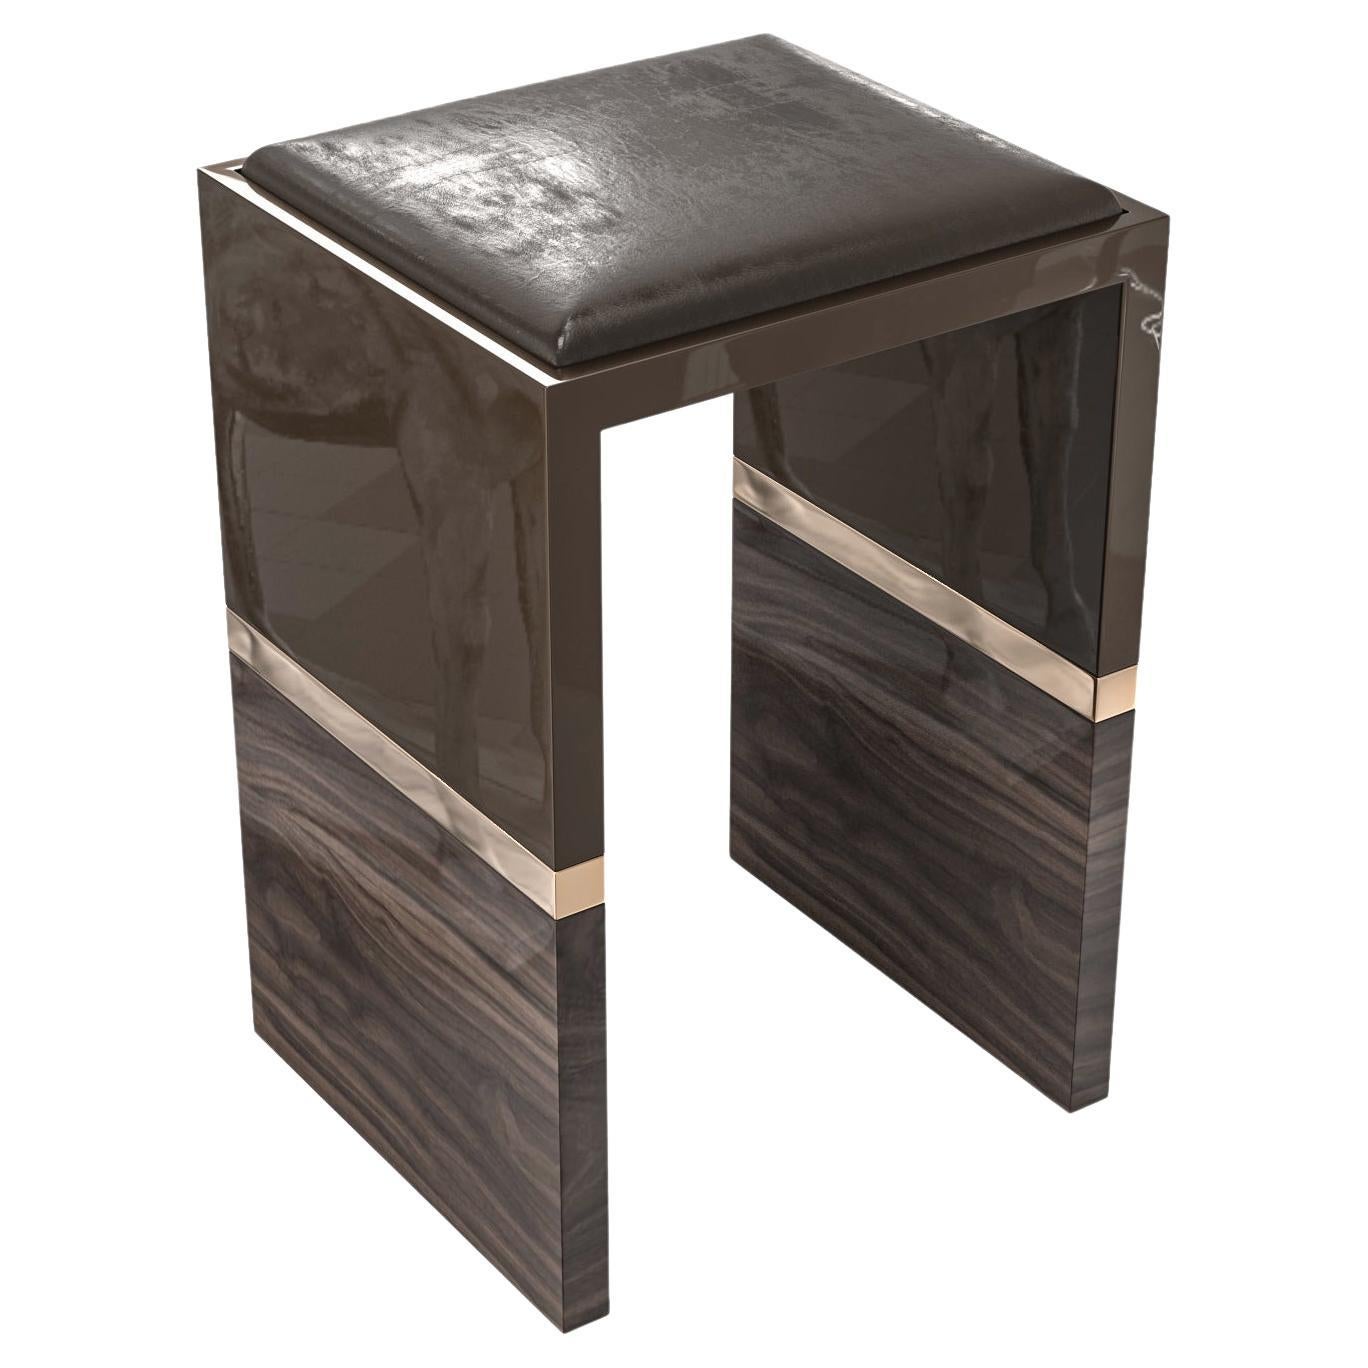 "Galeone" Bar Stool with Stainless Steel, Walnut and Bronze Details, Istanbul